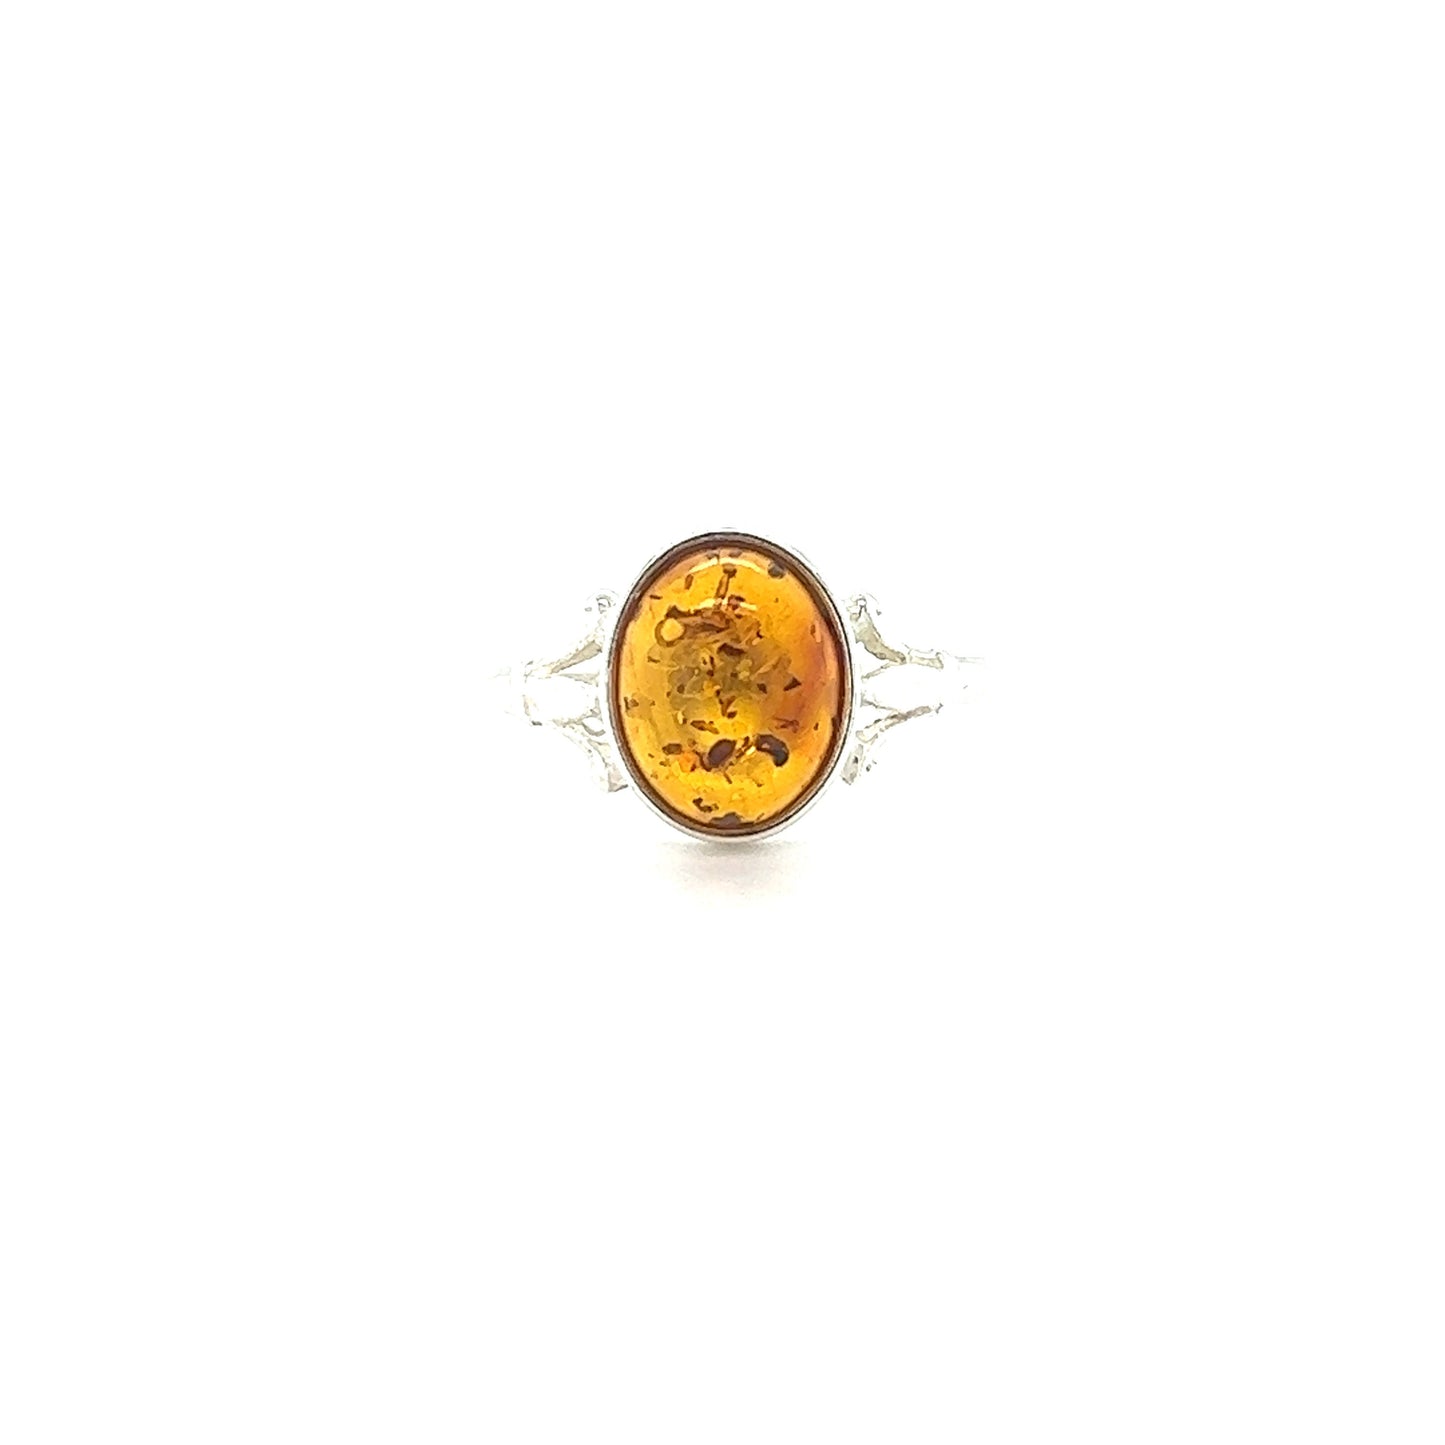 A Glowing Oval Amber Ring from Super Silver on a white background.